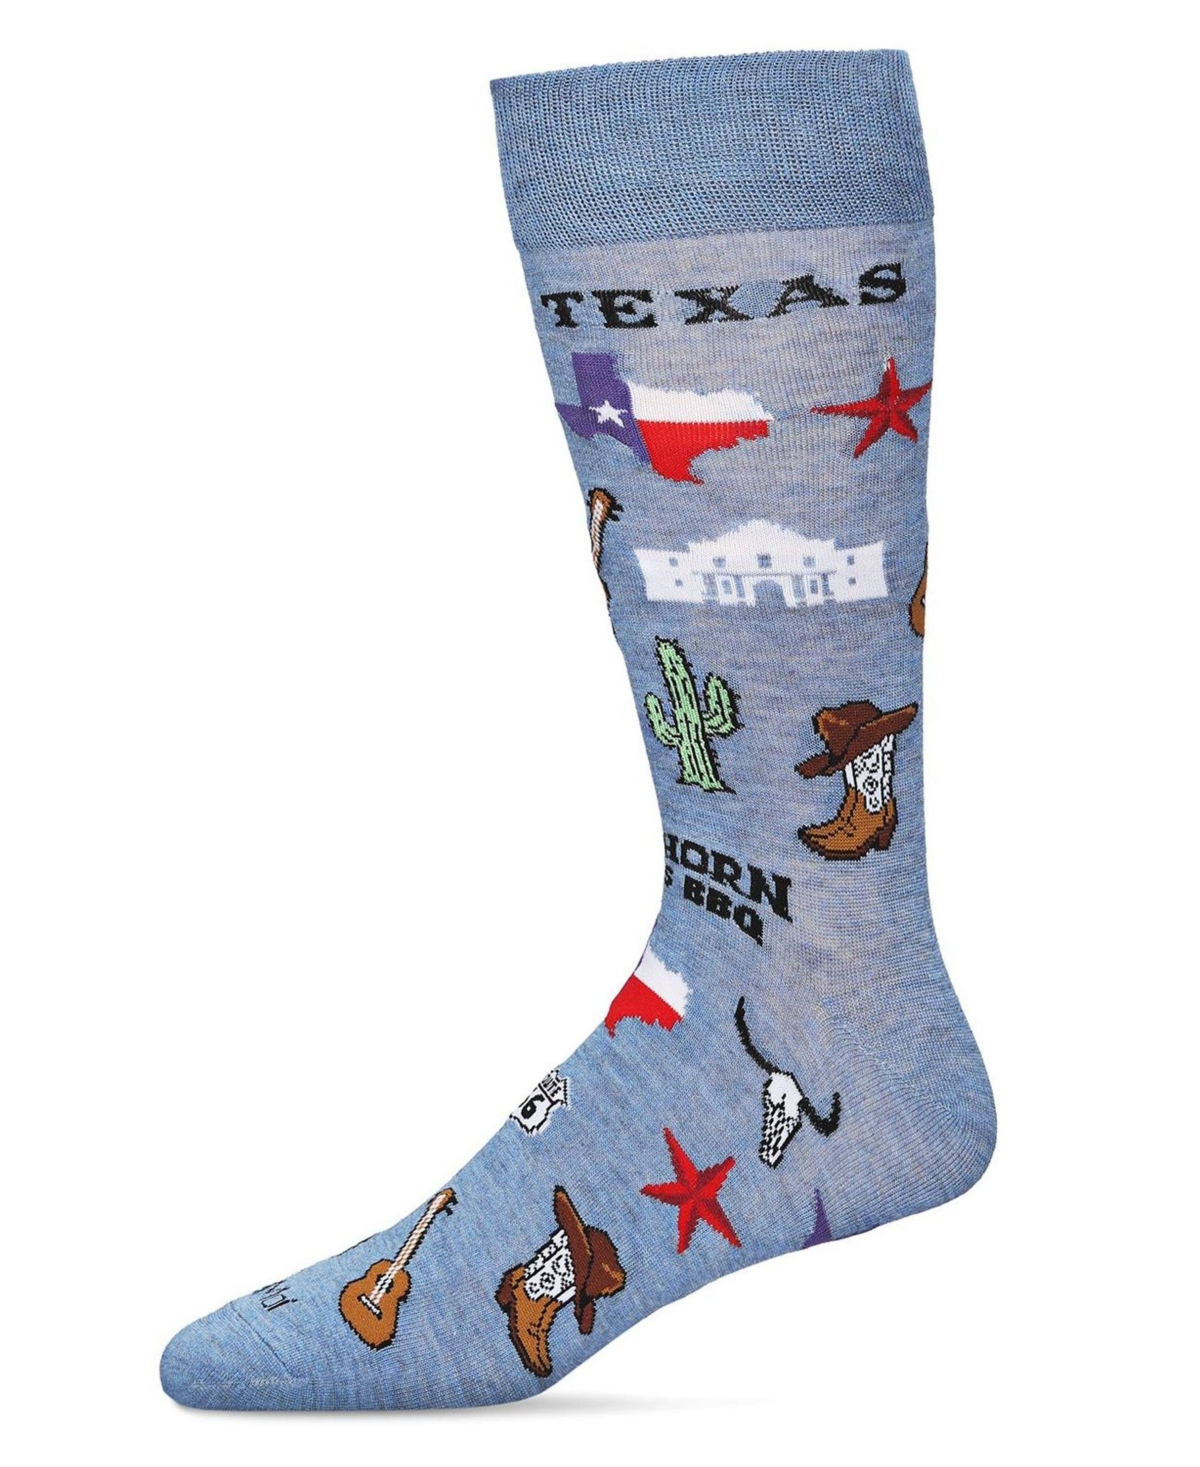 Memoi Men's Don't Mess With Texas Rayon From Bamboo Novelty Crew Socks In Denim Heather